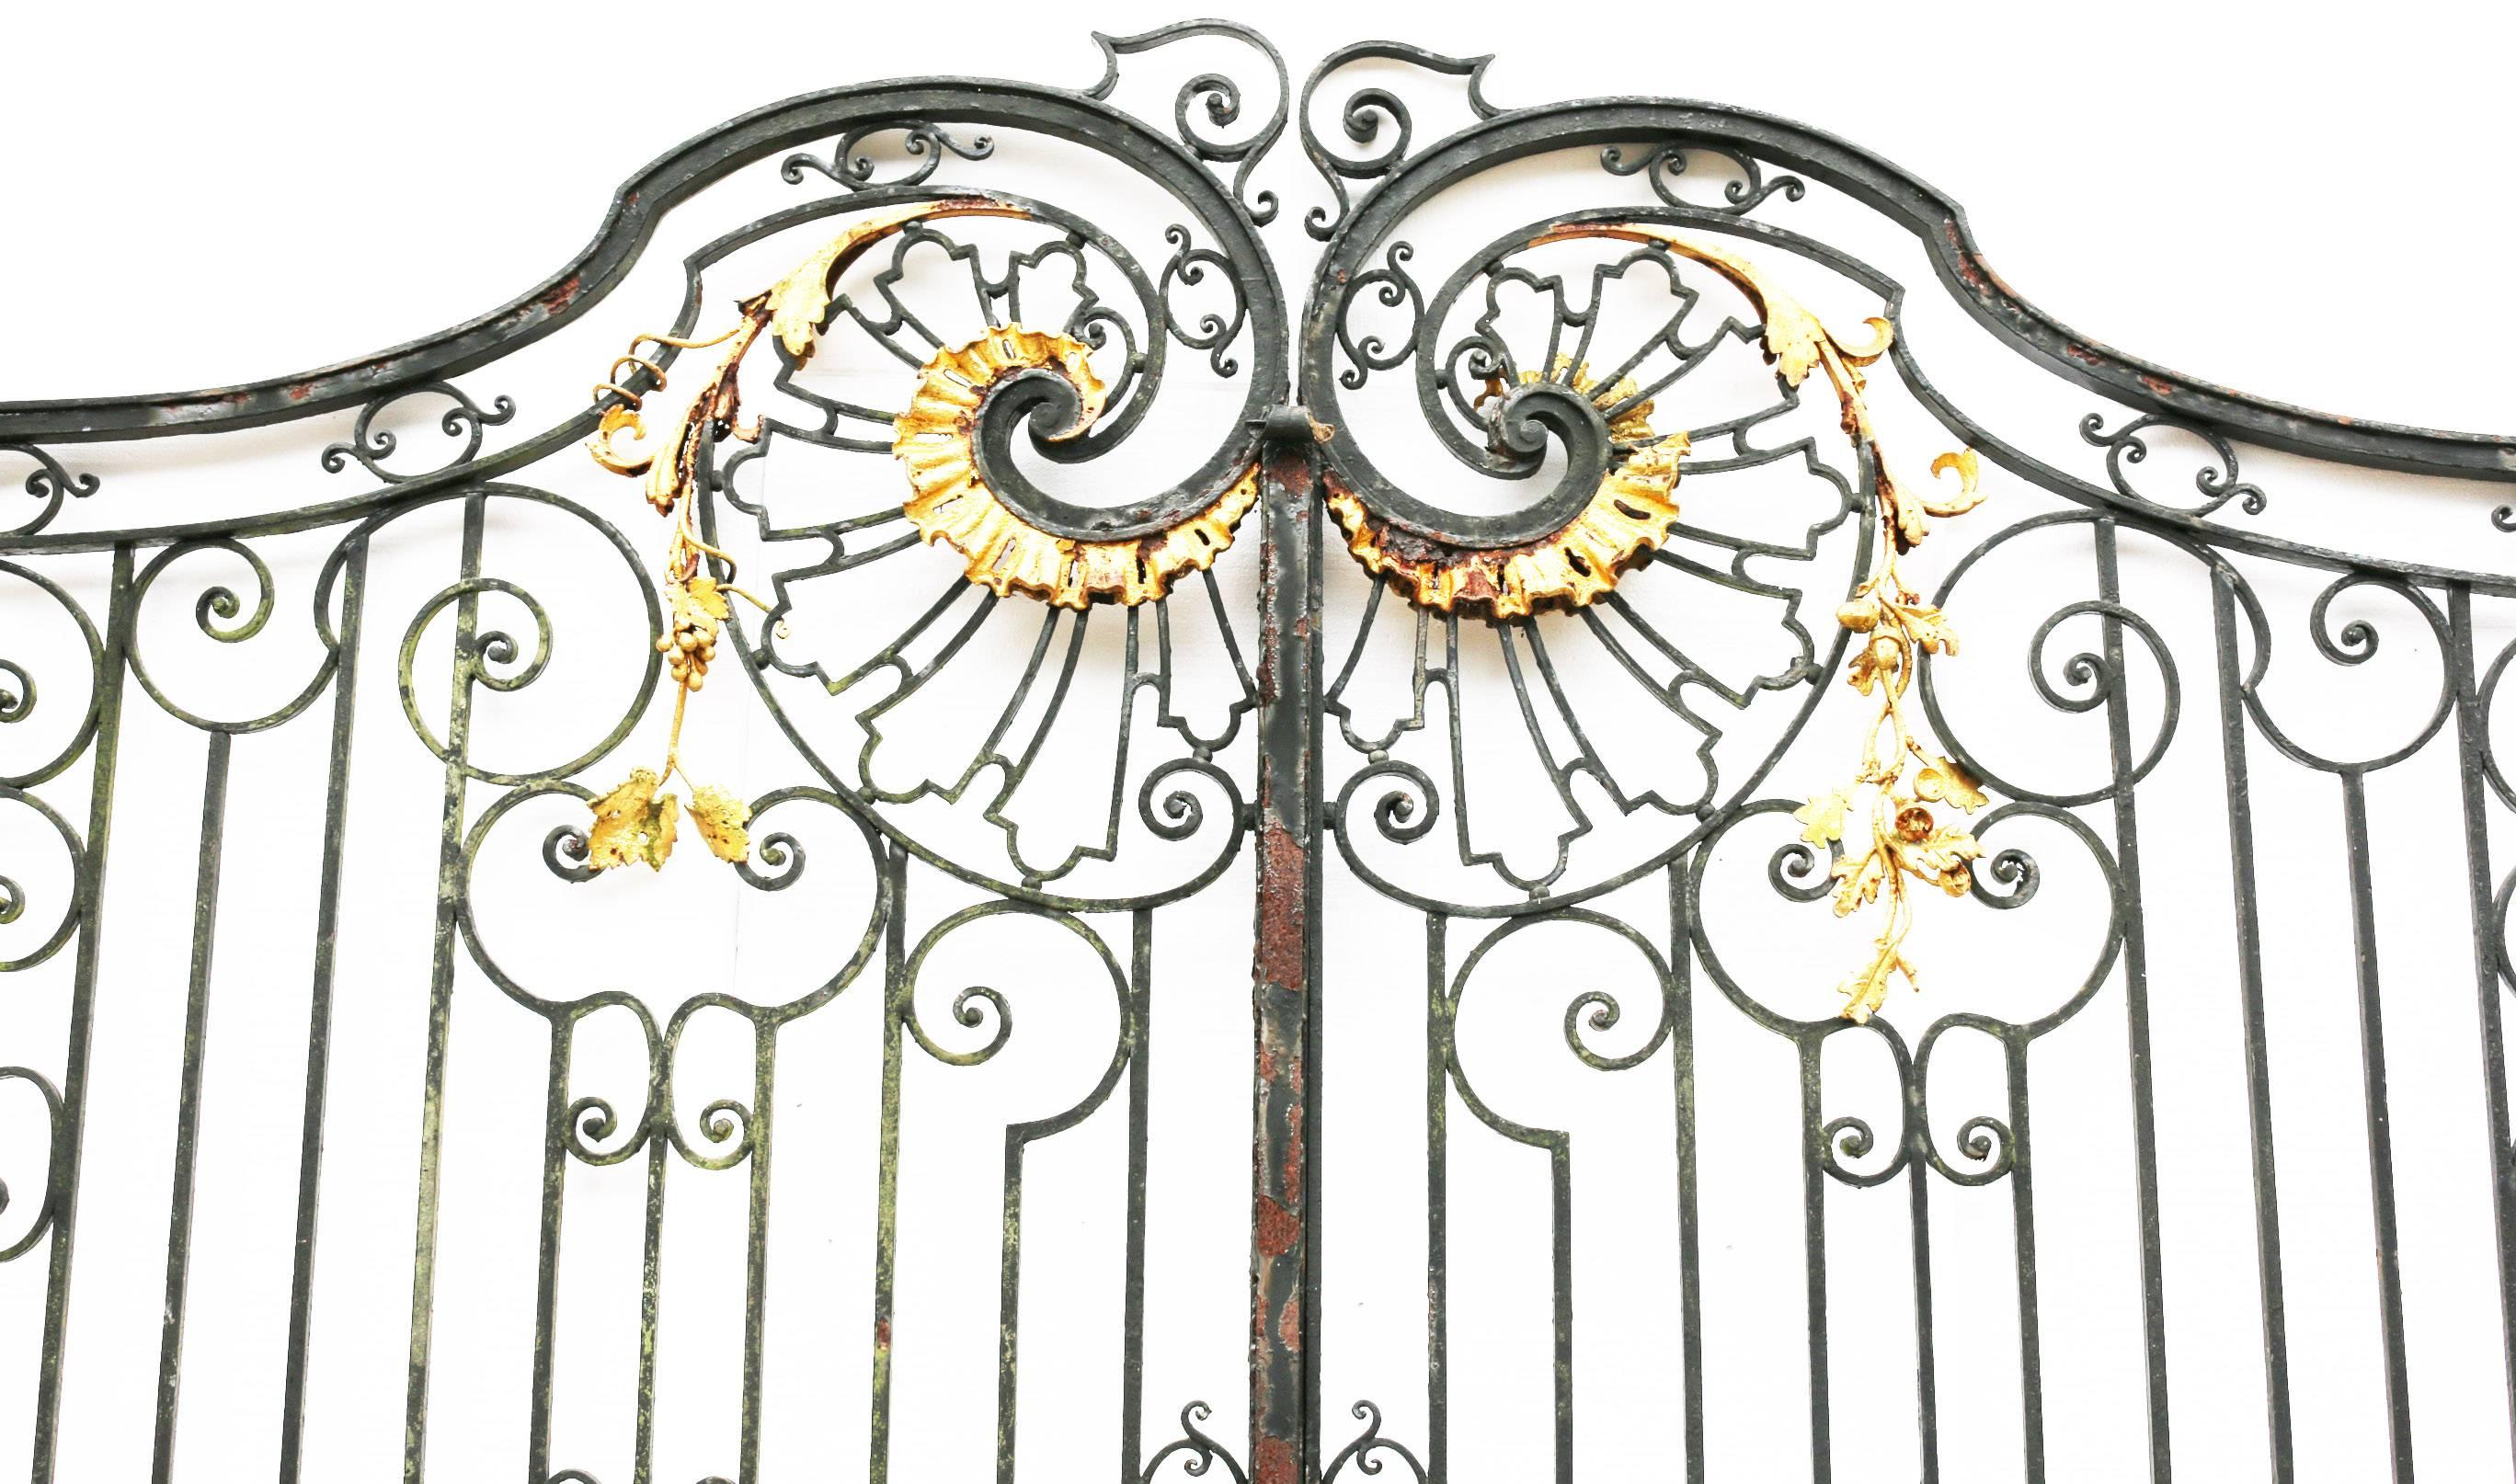 These impressive driveway gates are from the late 19th century. They are painted and gilded and in good structural condition. Small losses.

They do not include hinges or a working latch.
All widths are excluding hinges.
Measures: Width 11ft,